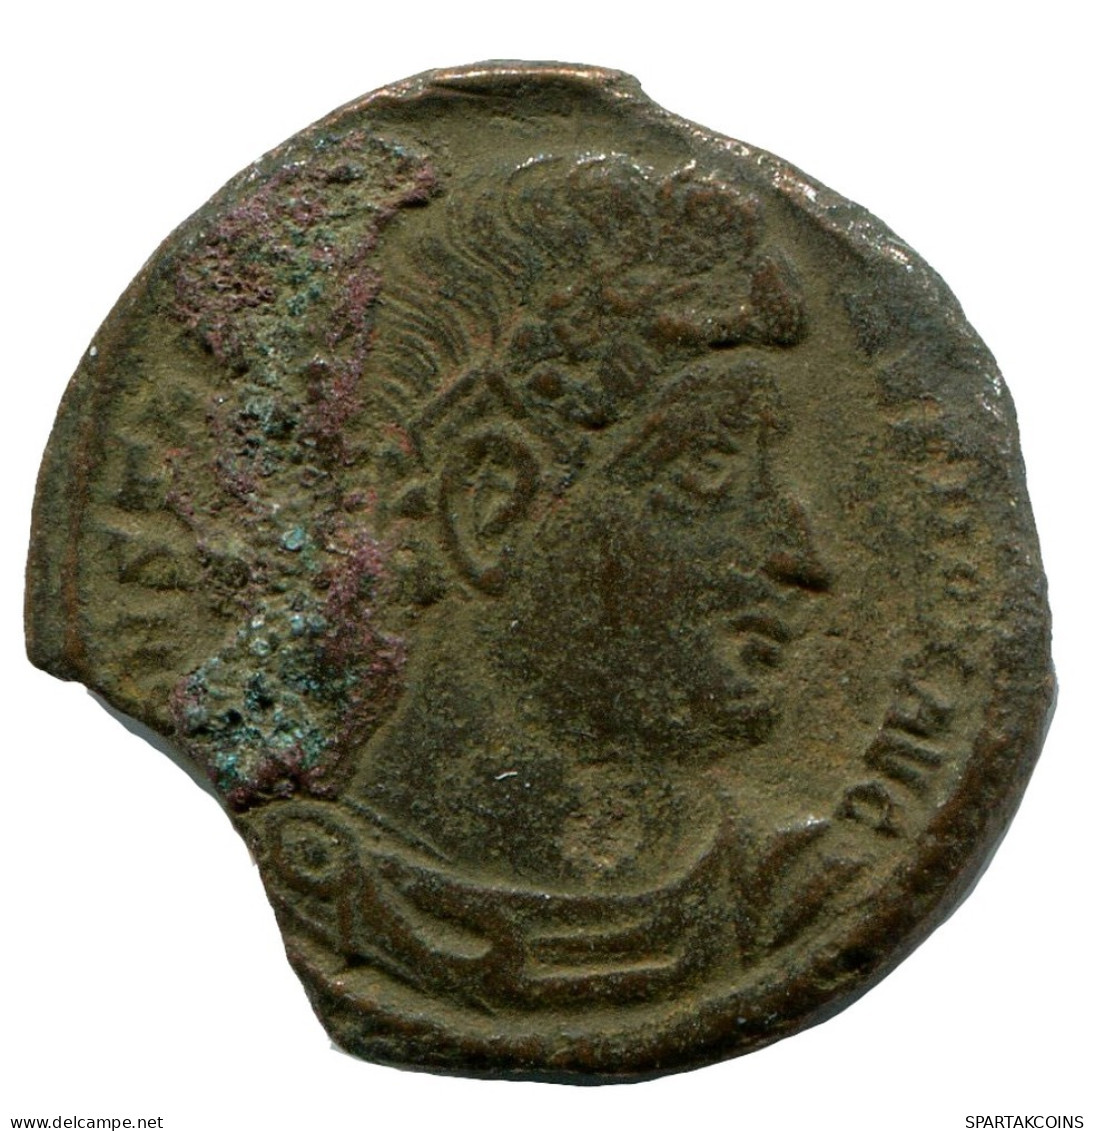 CONSTANTINE I MINTED IN NICOMEDIA FOUND IN IHNASYAH HOARD EGYPT #ANC10825.14.U.A - The Christian Empire (307 AD To 363 AD)